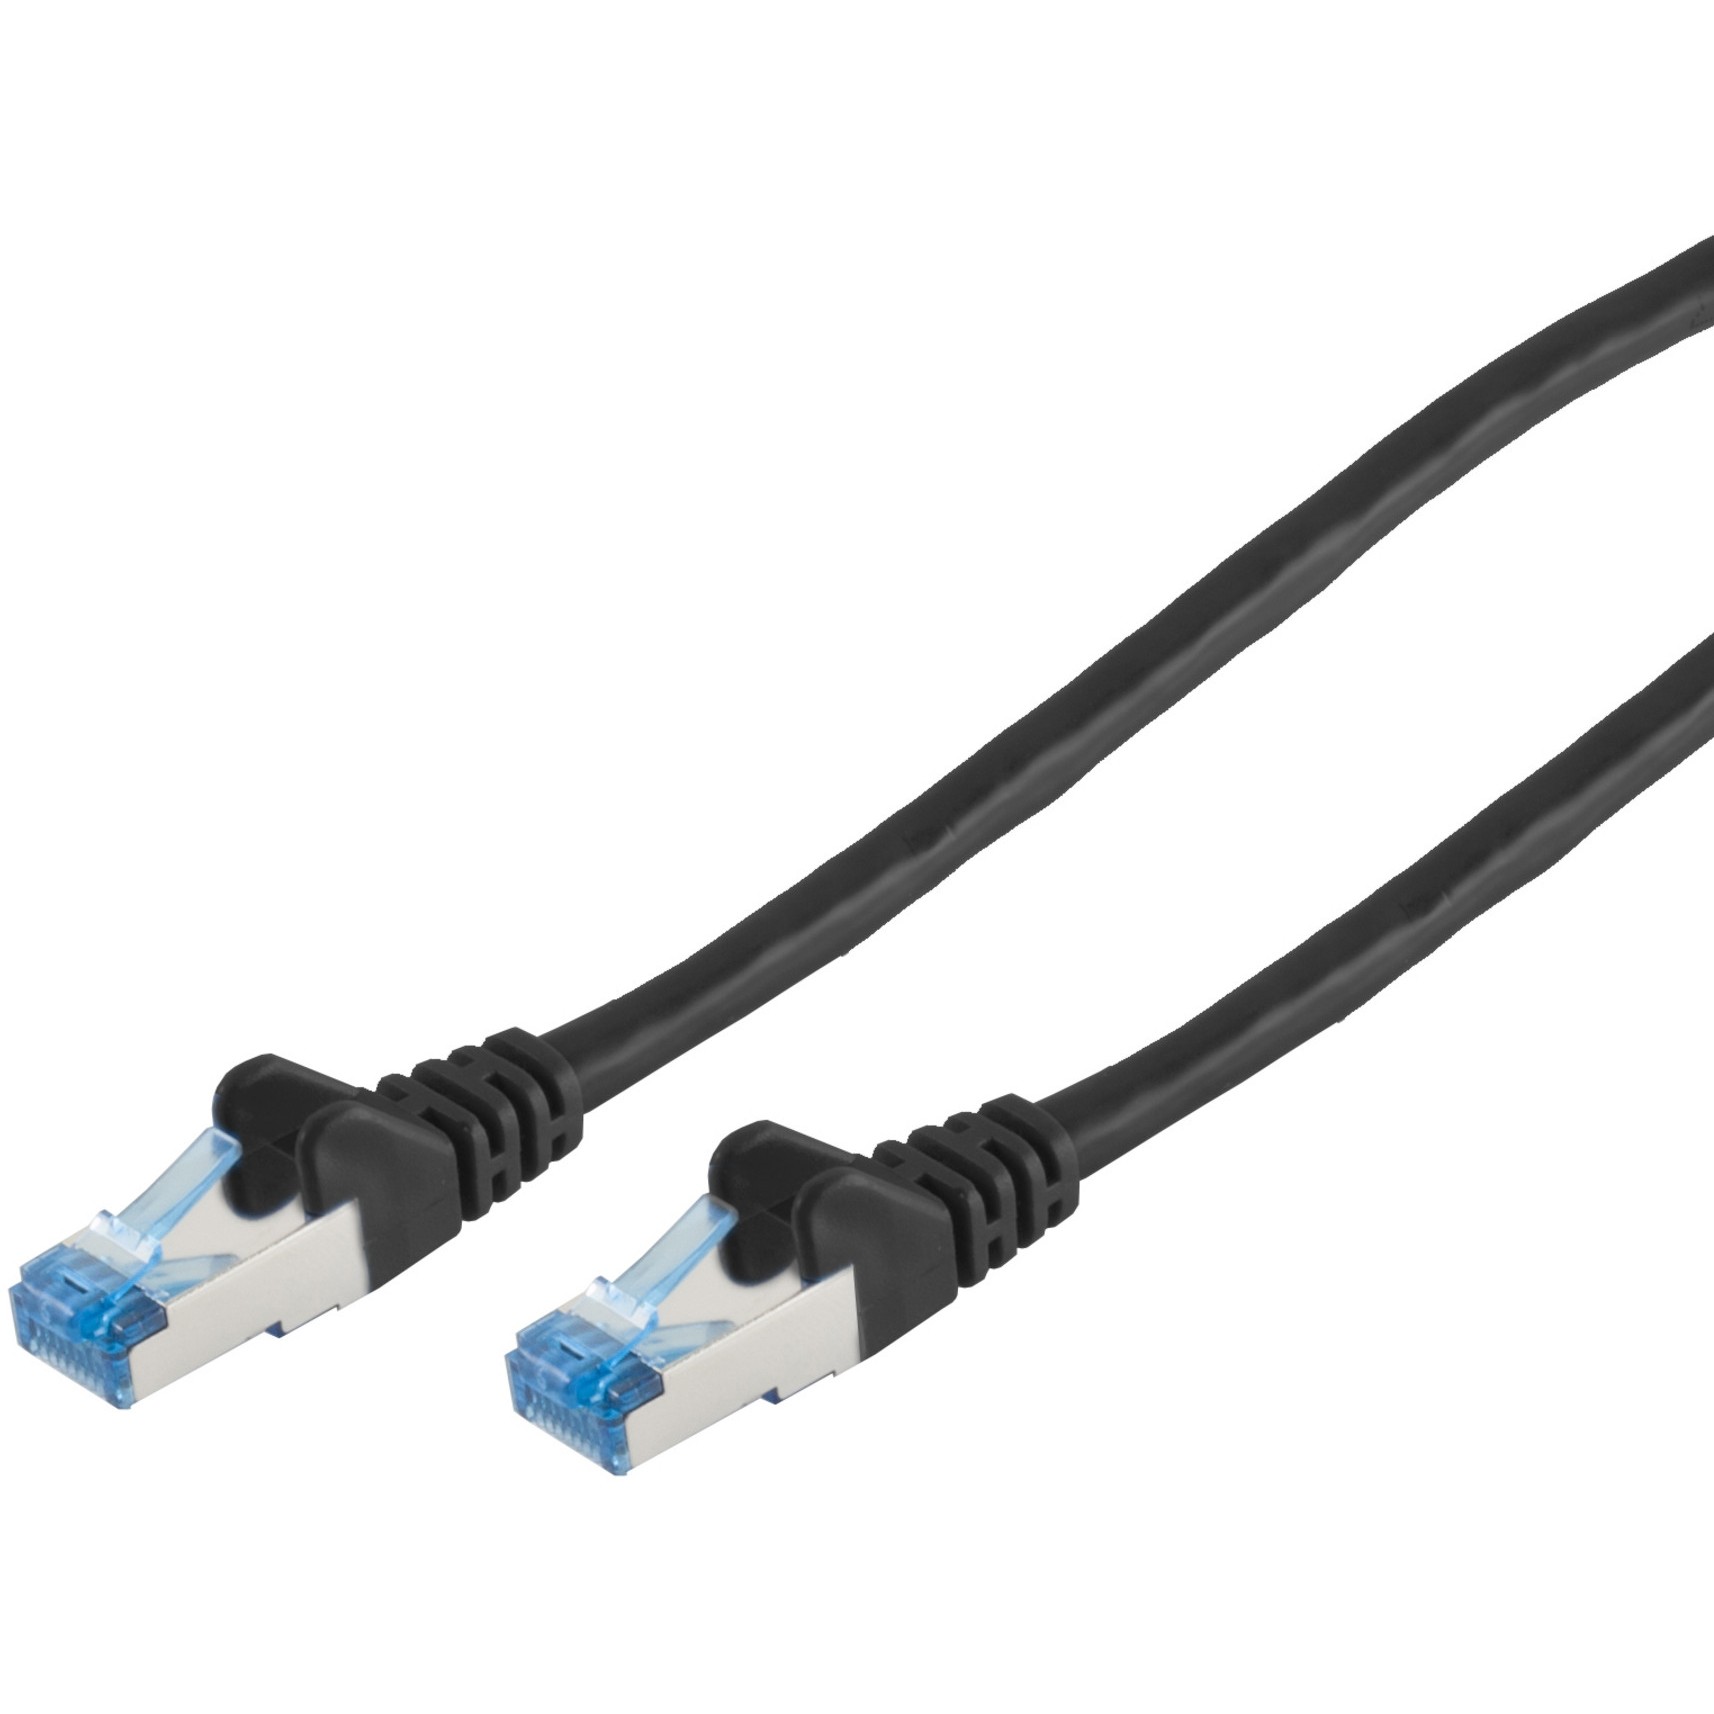 S-Conn 75717-S networking cable